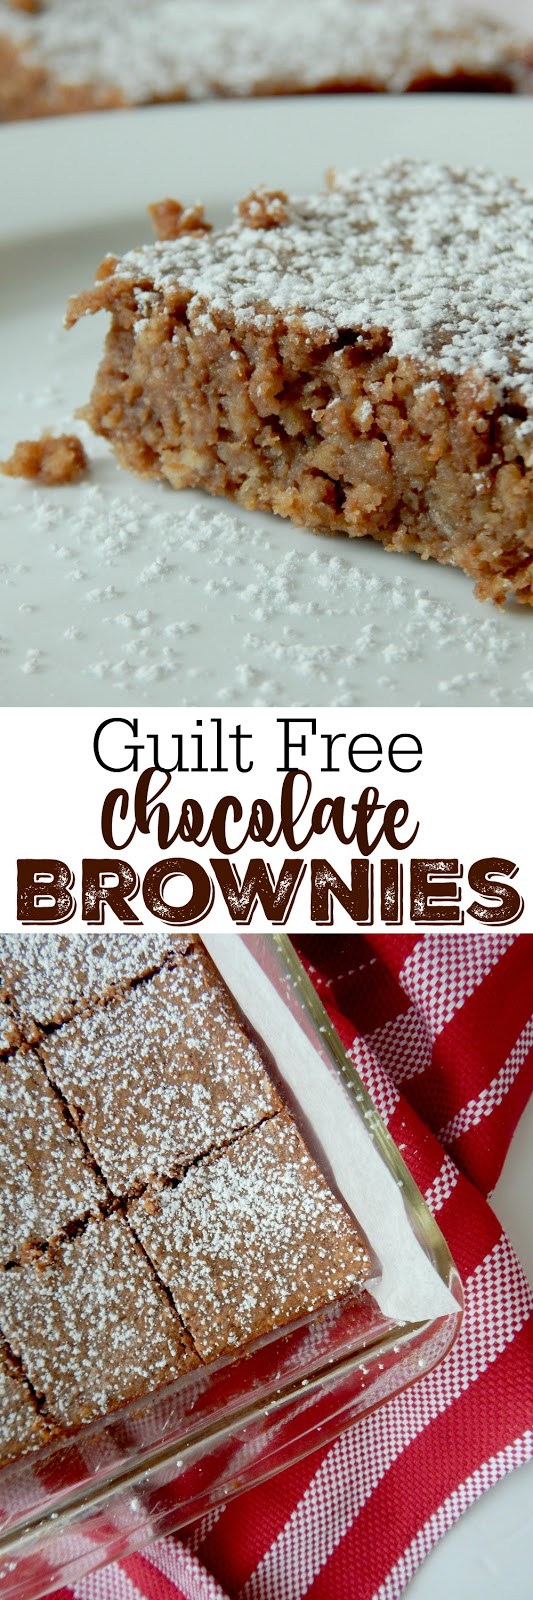 Guilt Free Chocolate Brownies...a few healthy swaps make these brownies healthier, yet still are decadent, fudgy and tasty! (sweetandsavoryfood.com)